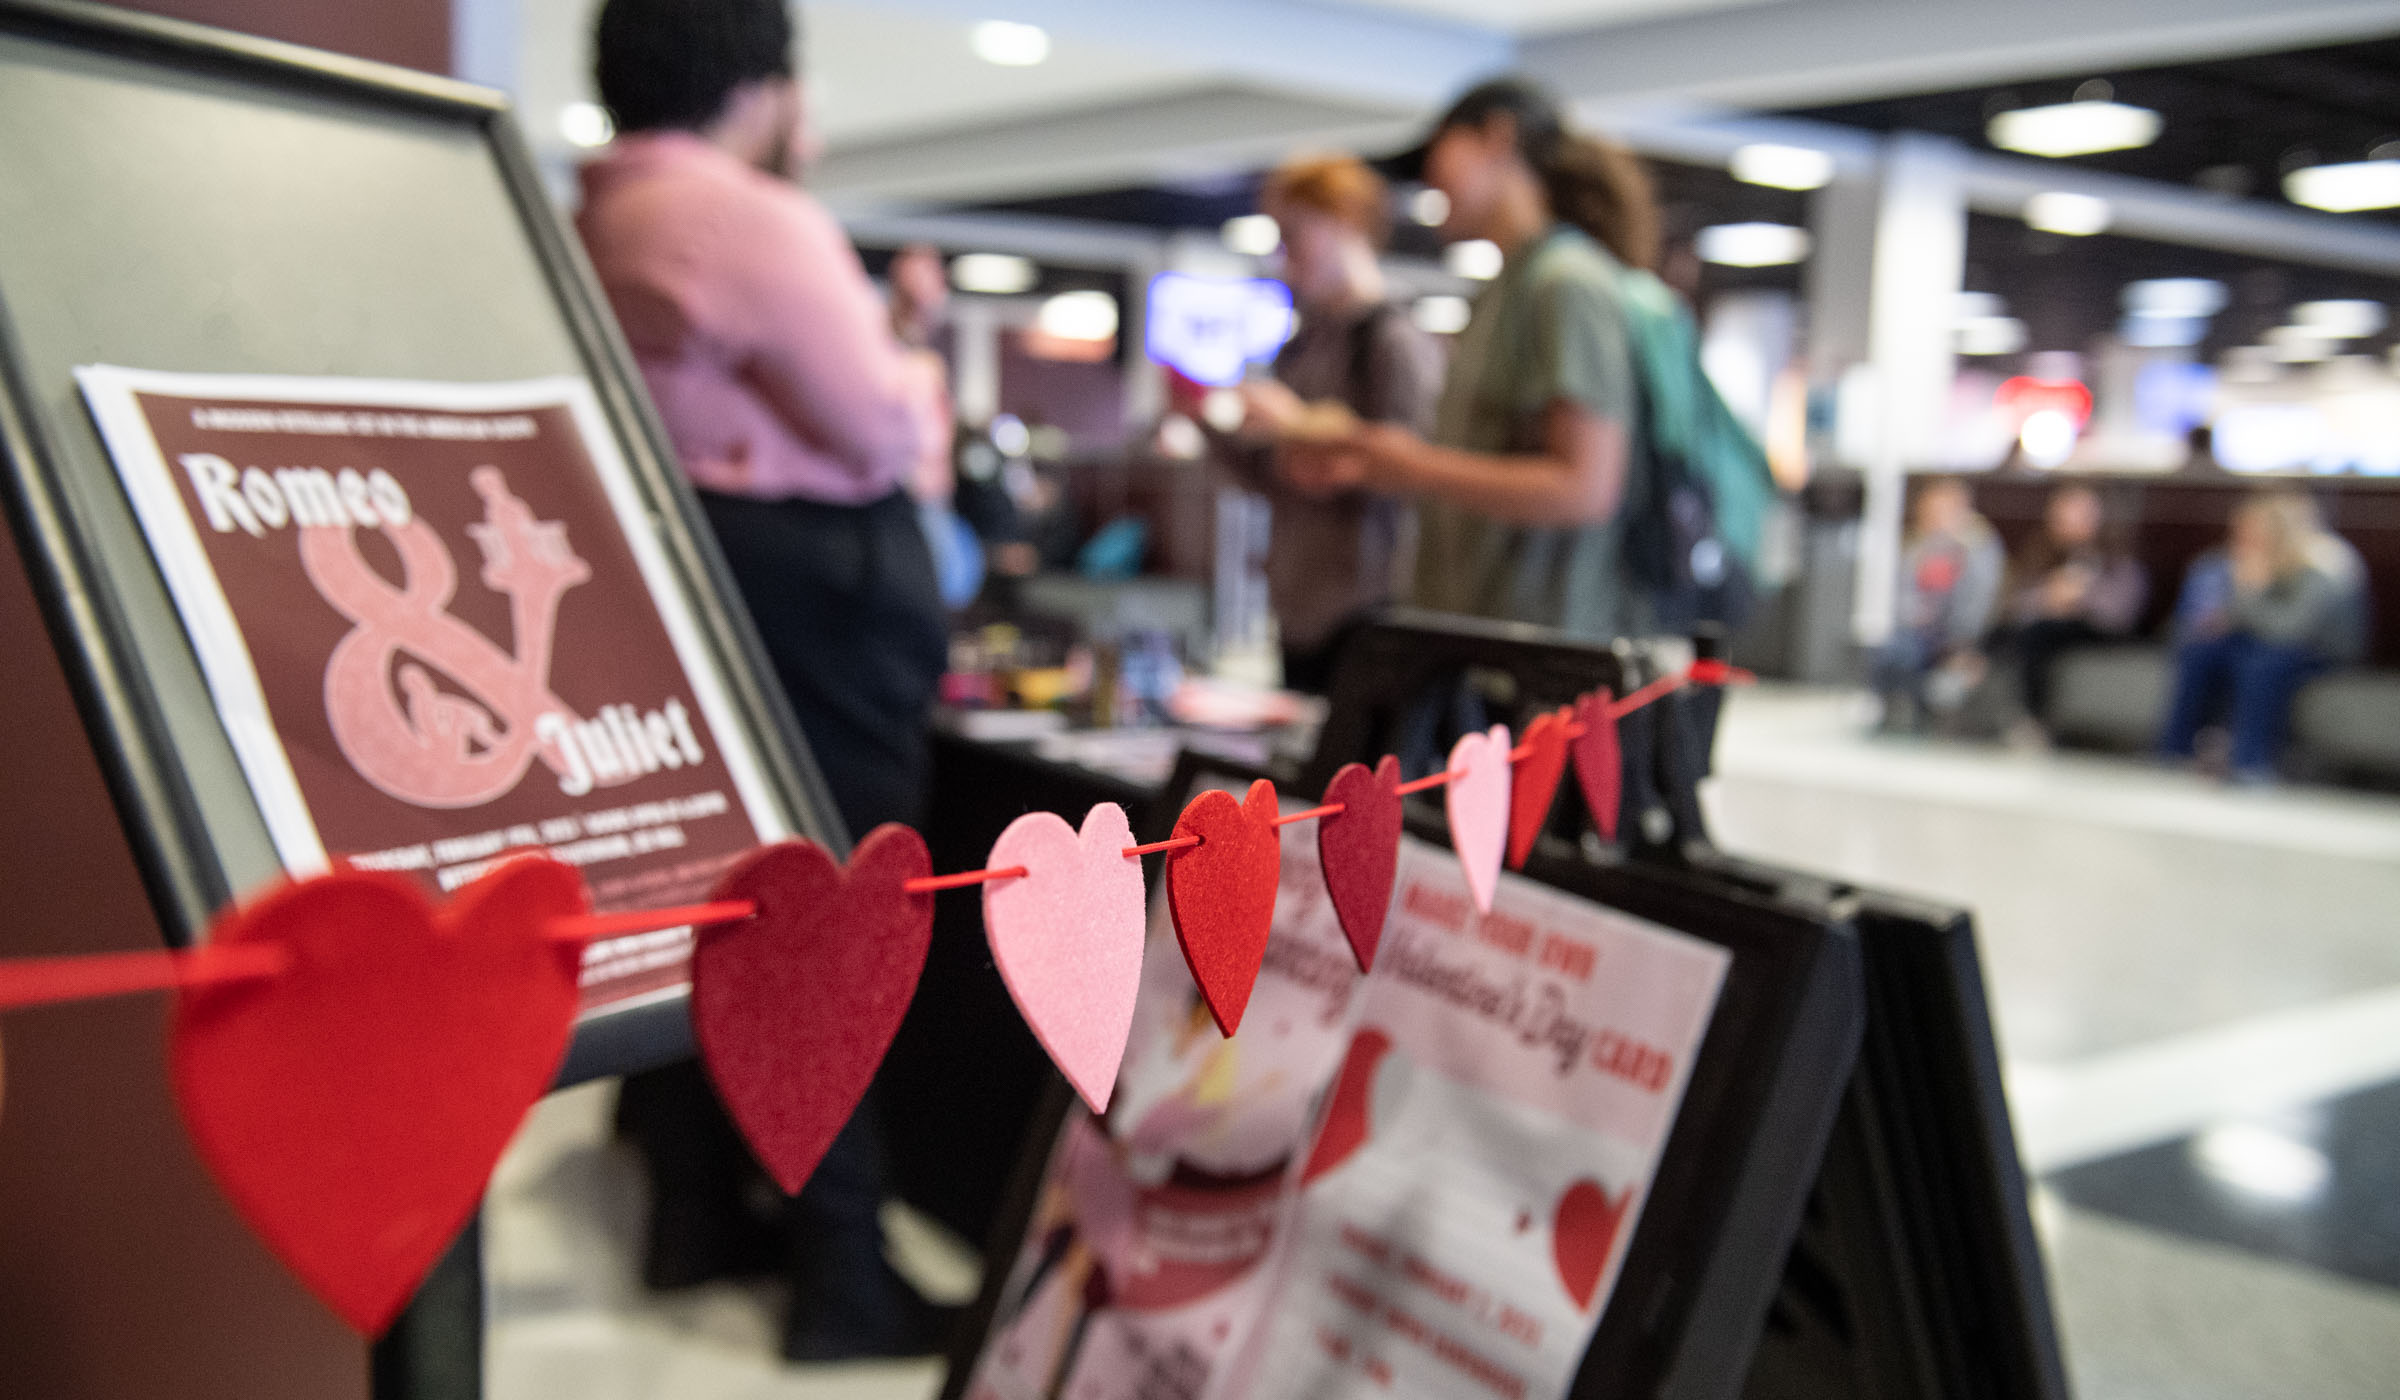 A garland of pink and red hearts demarcates a Student Activities outreach table in Colvard Union, promoting Romeo and Juliet and Dance Marathon events.